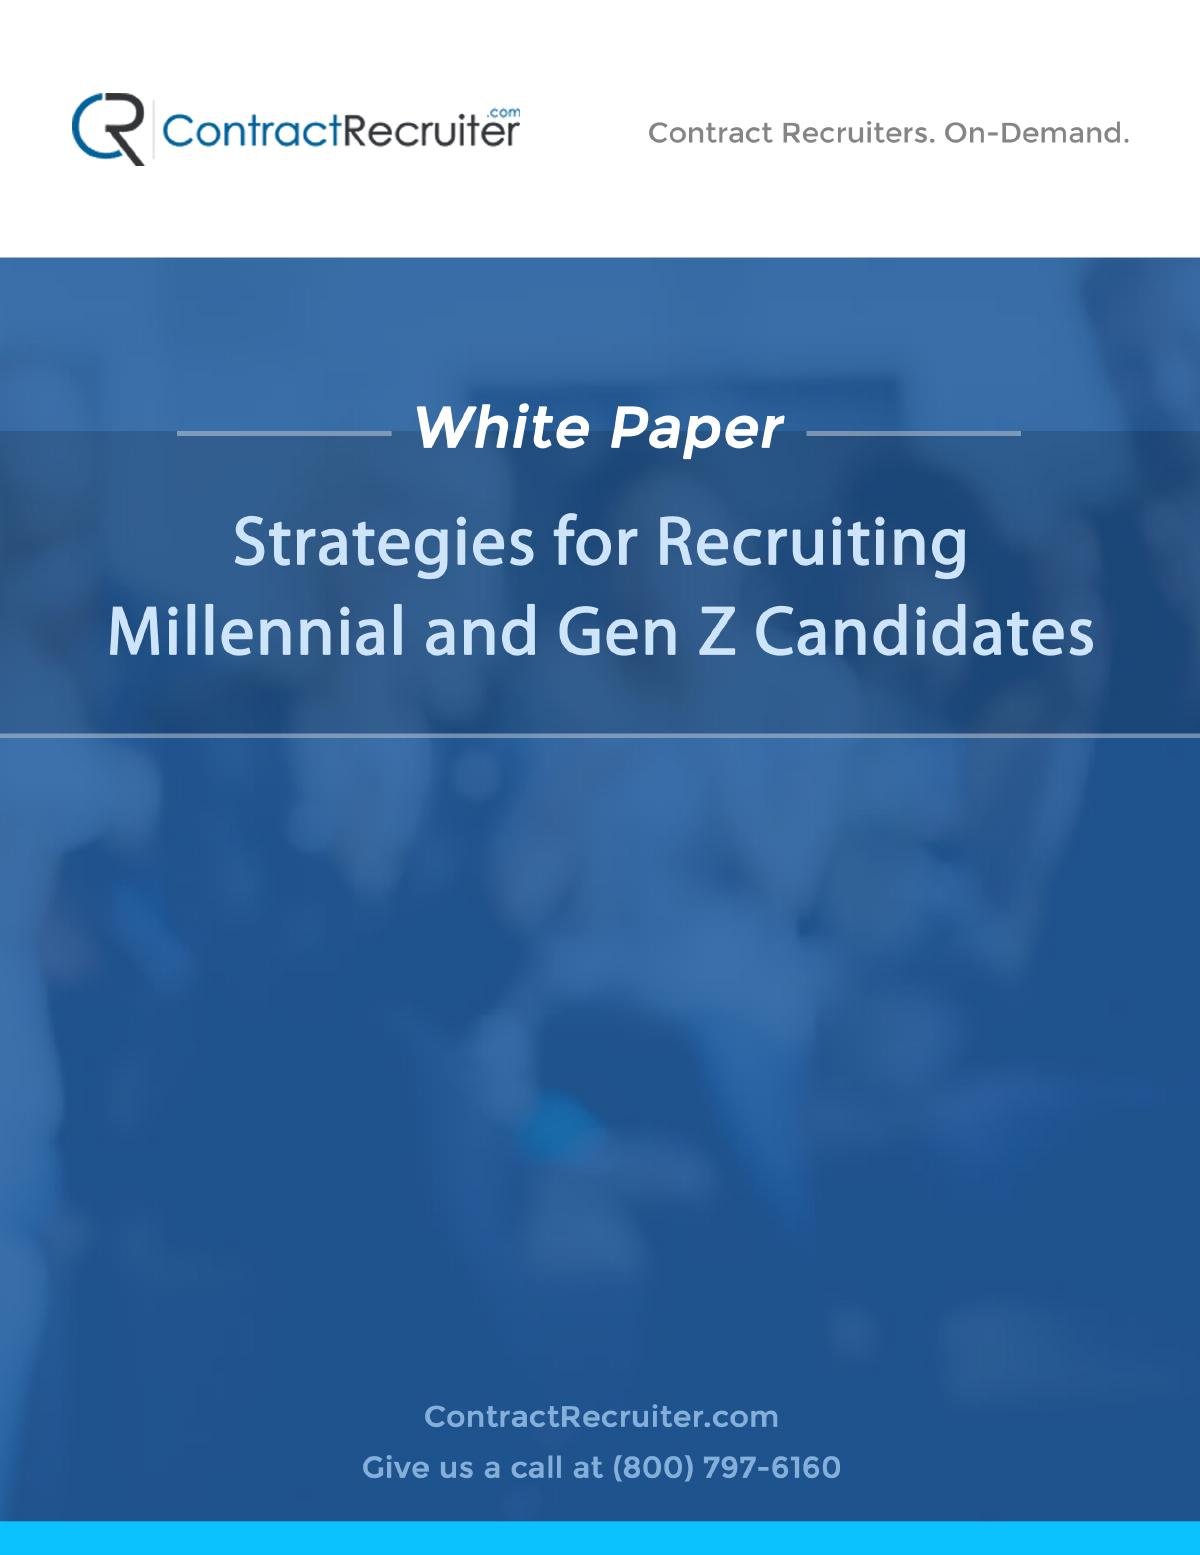 Strategies for Recruiting Millennial and Gen Z Candidates